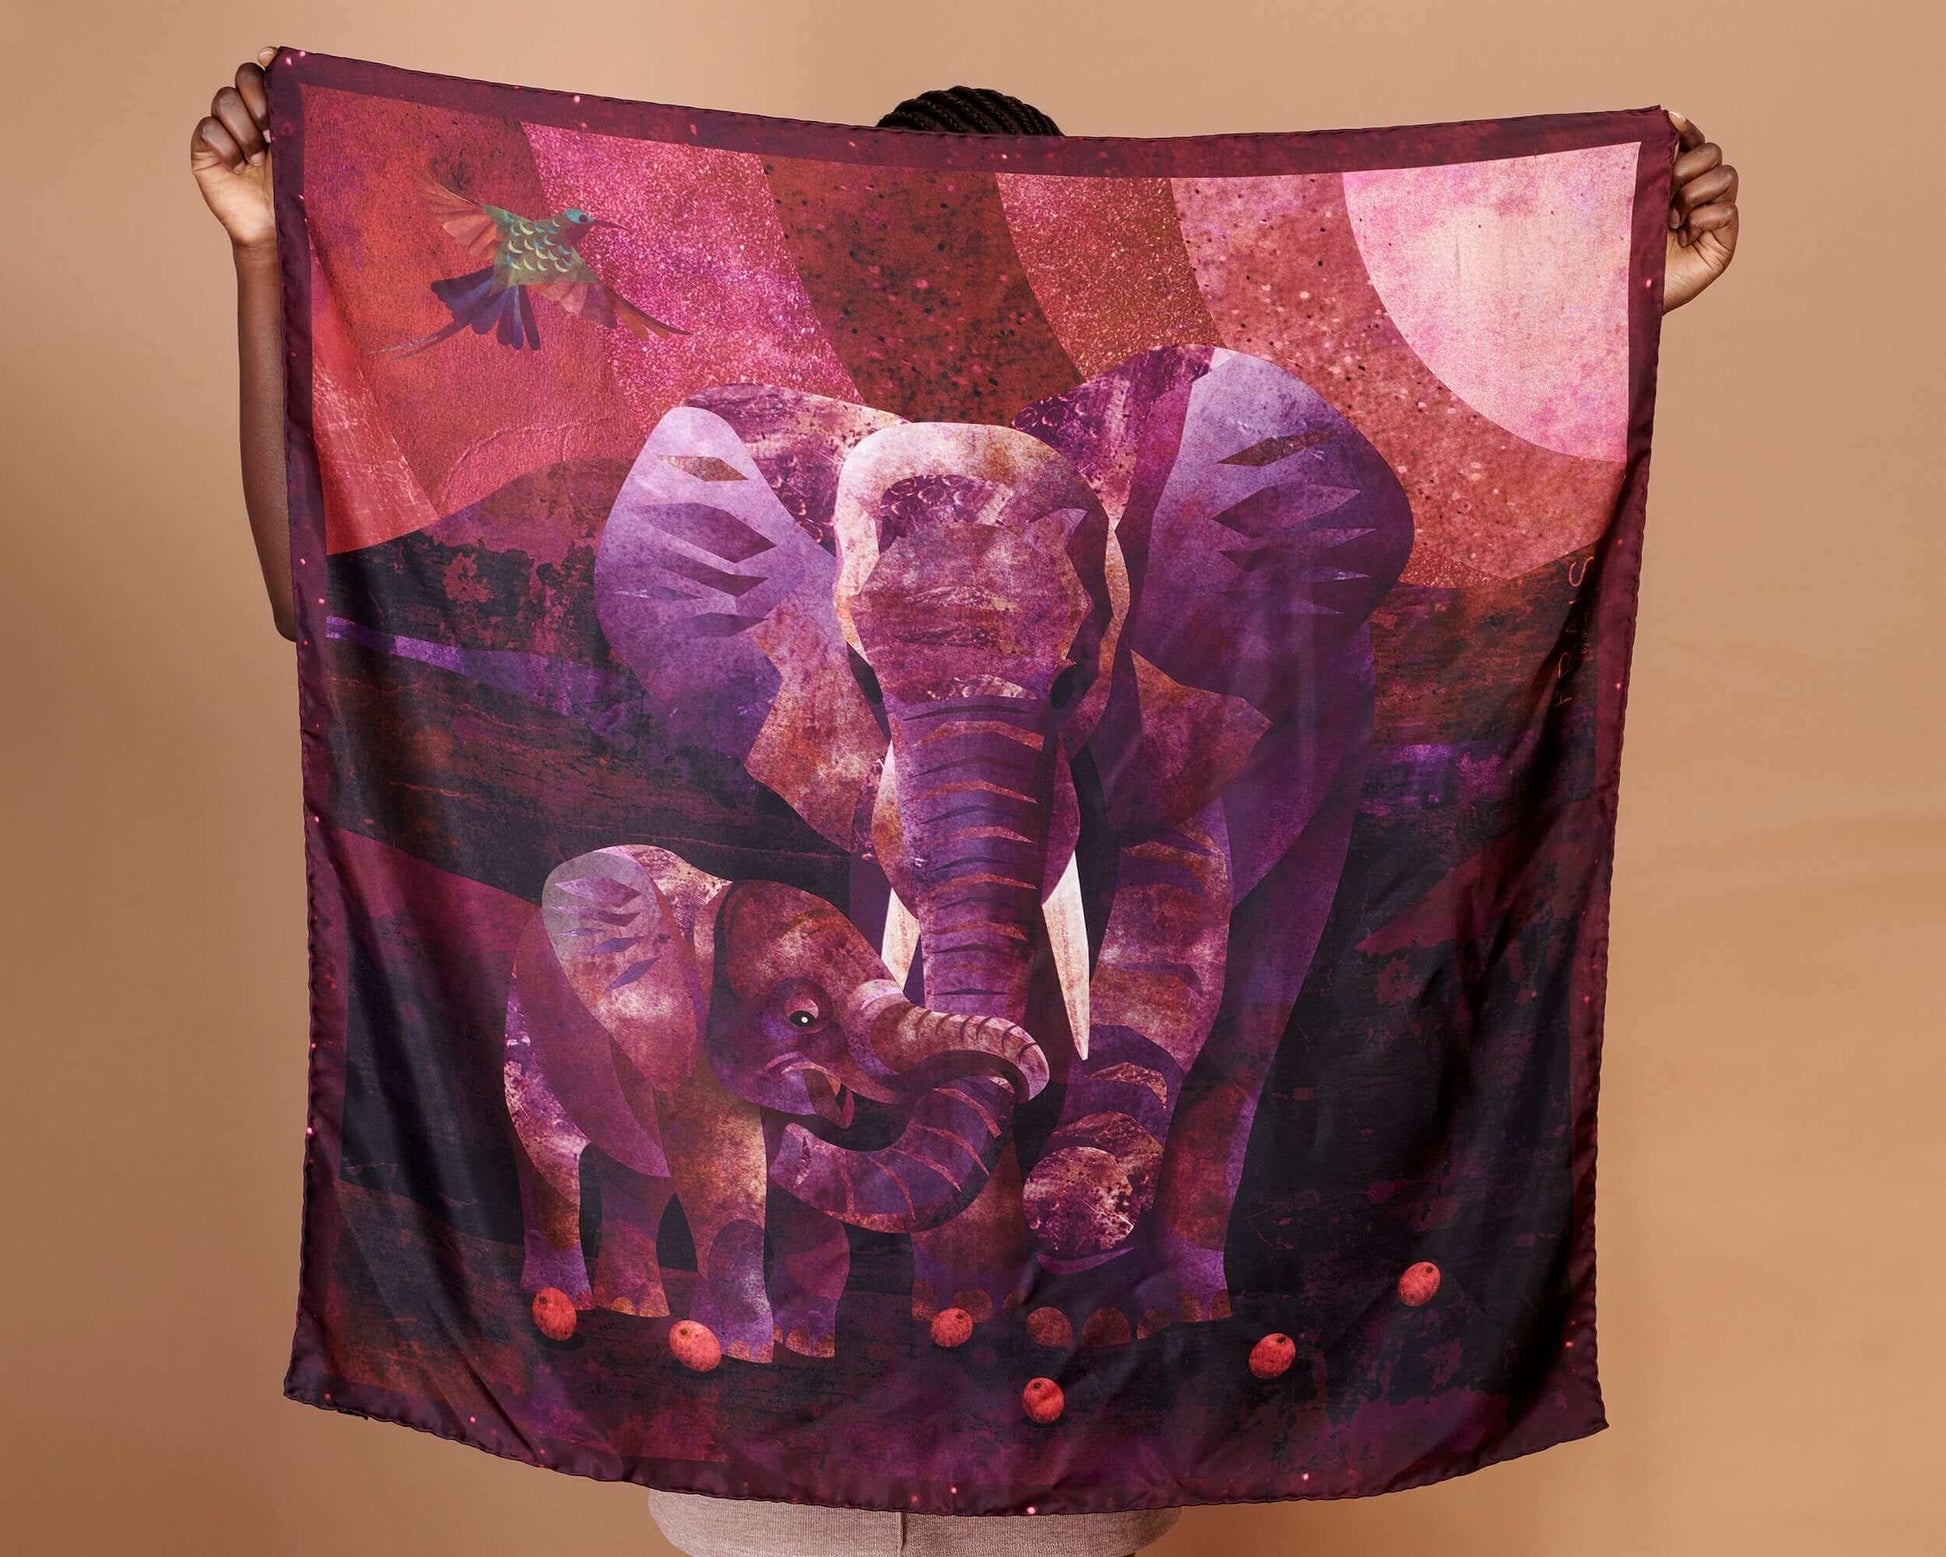 Silk Twill Scarf, Elephant and Calf Print, Bordeaux and Plum Hues, Original Design, Made In Italy